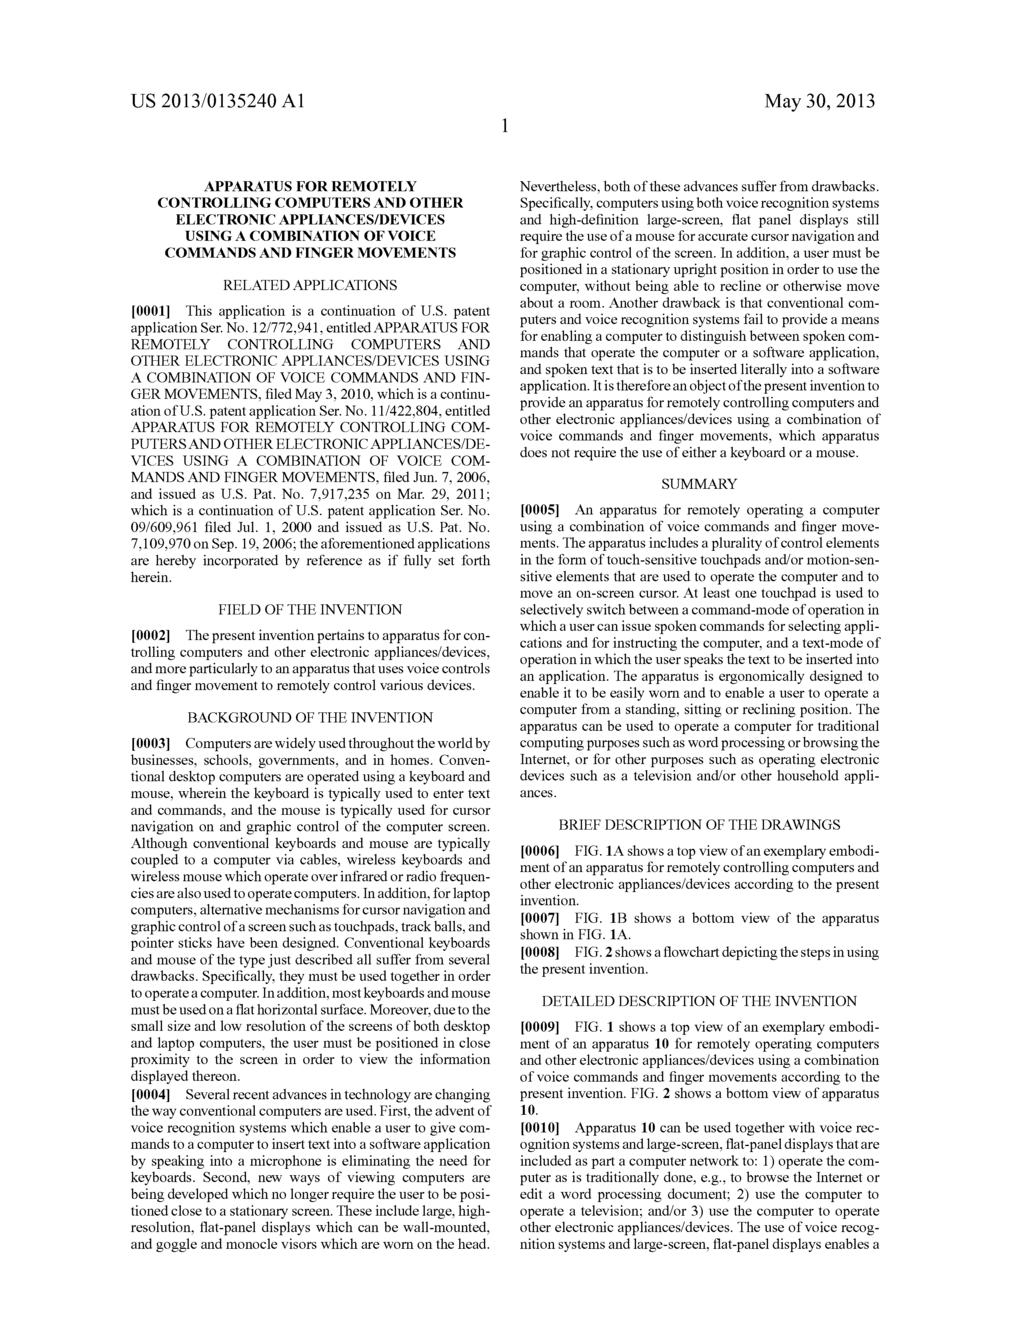 US 2013/0135240 A1 May 30, 2013 APPARATUS FOR REMOTELY CONTROLLING COMPUTERS AND OTHER ELECTRONIC APPLIANCES/DEVICES USINGA COMBINATION OF VOICE COMMANDS AND FINGER MOVEMENTS RELATED APPLICATIONS